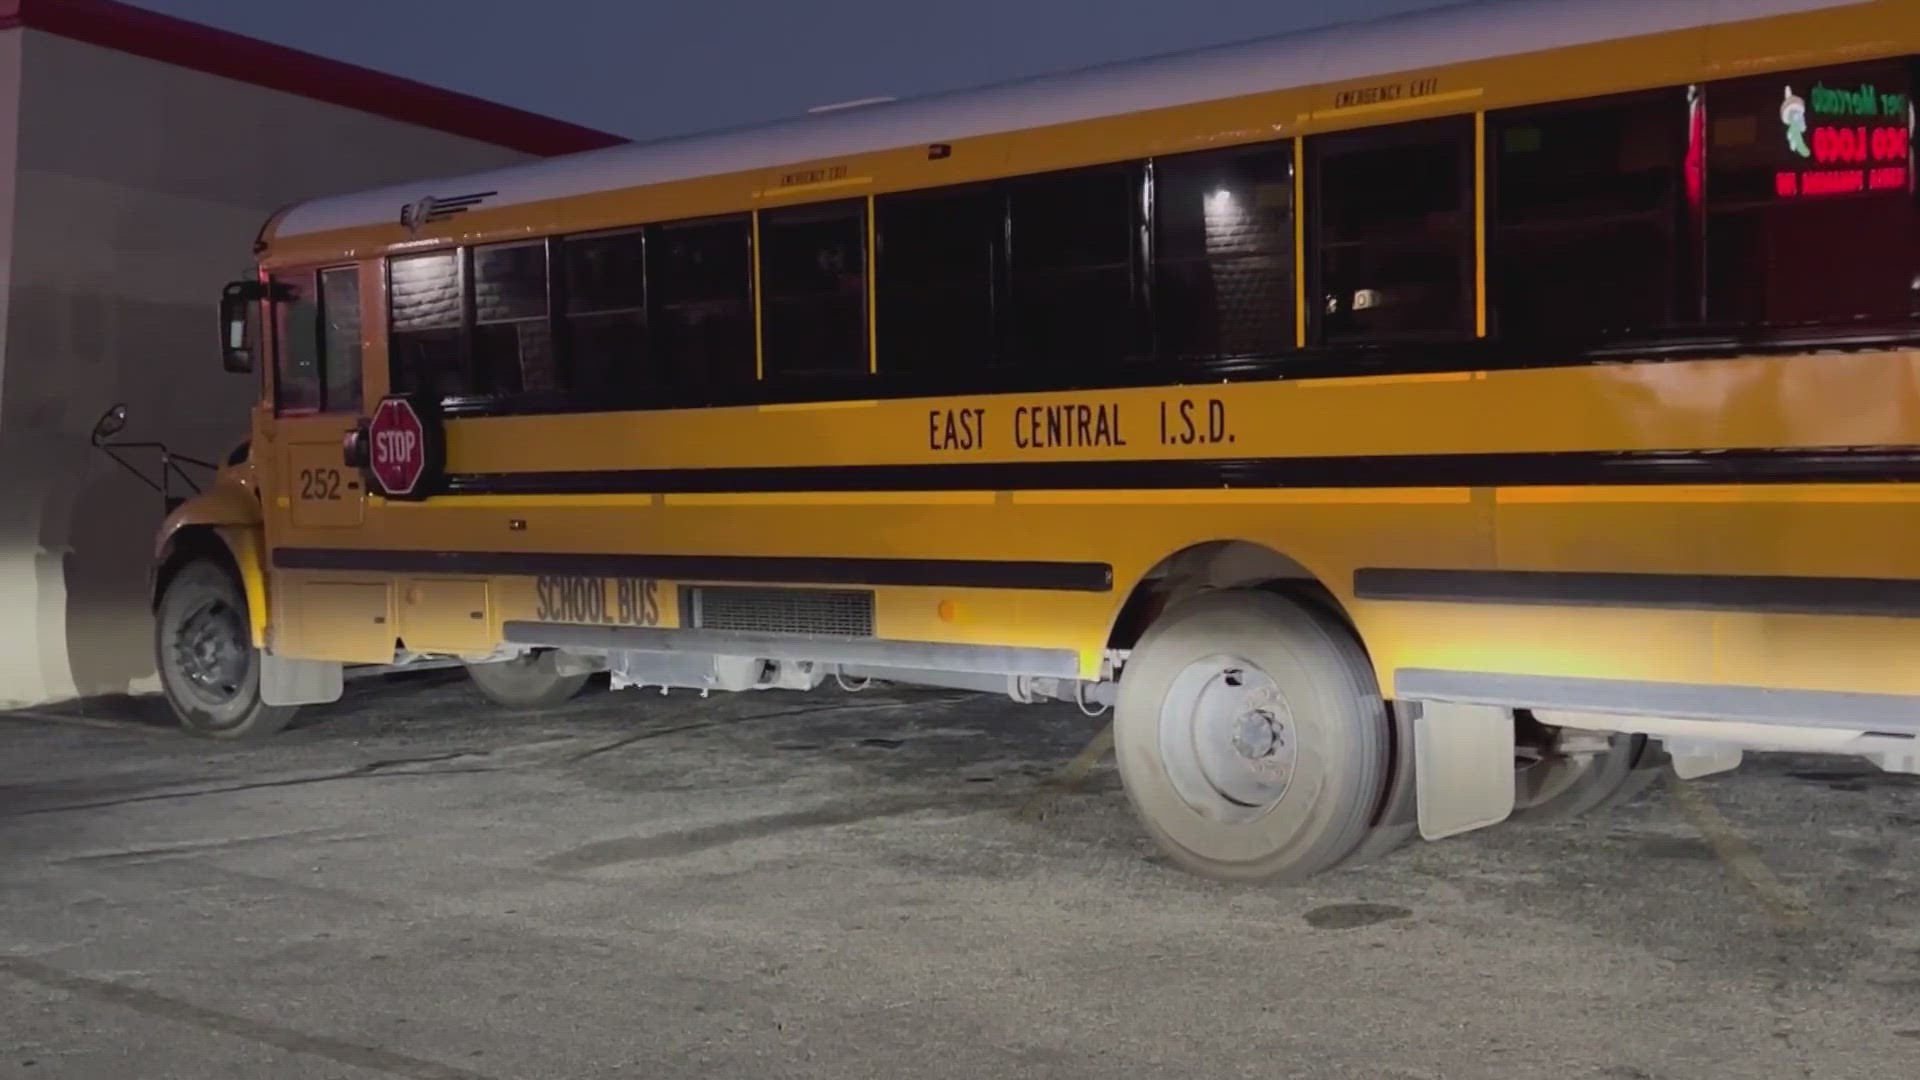 Officials with East Central ISD woke up to a missing school bus on Thursday morning.